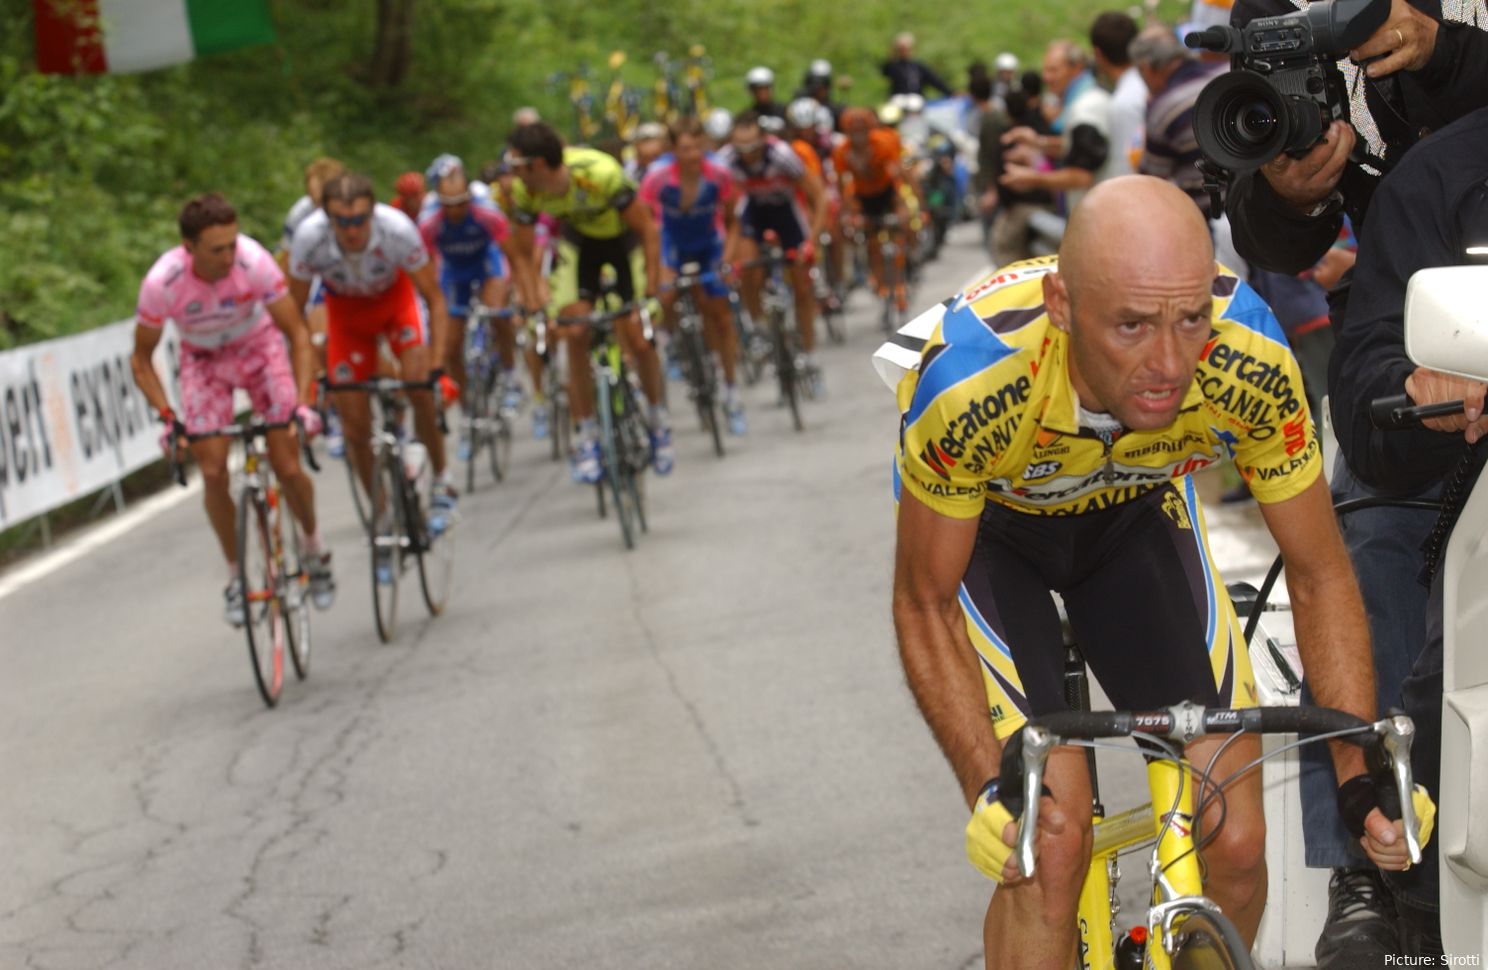 Marco Pantani is one of the icons of the Giro d'Italia. @Sirotti